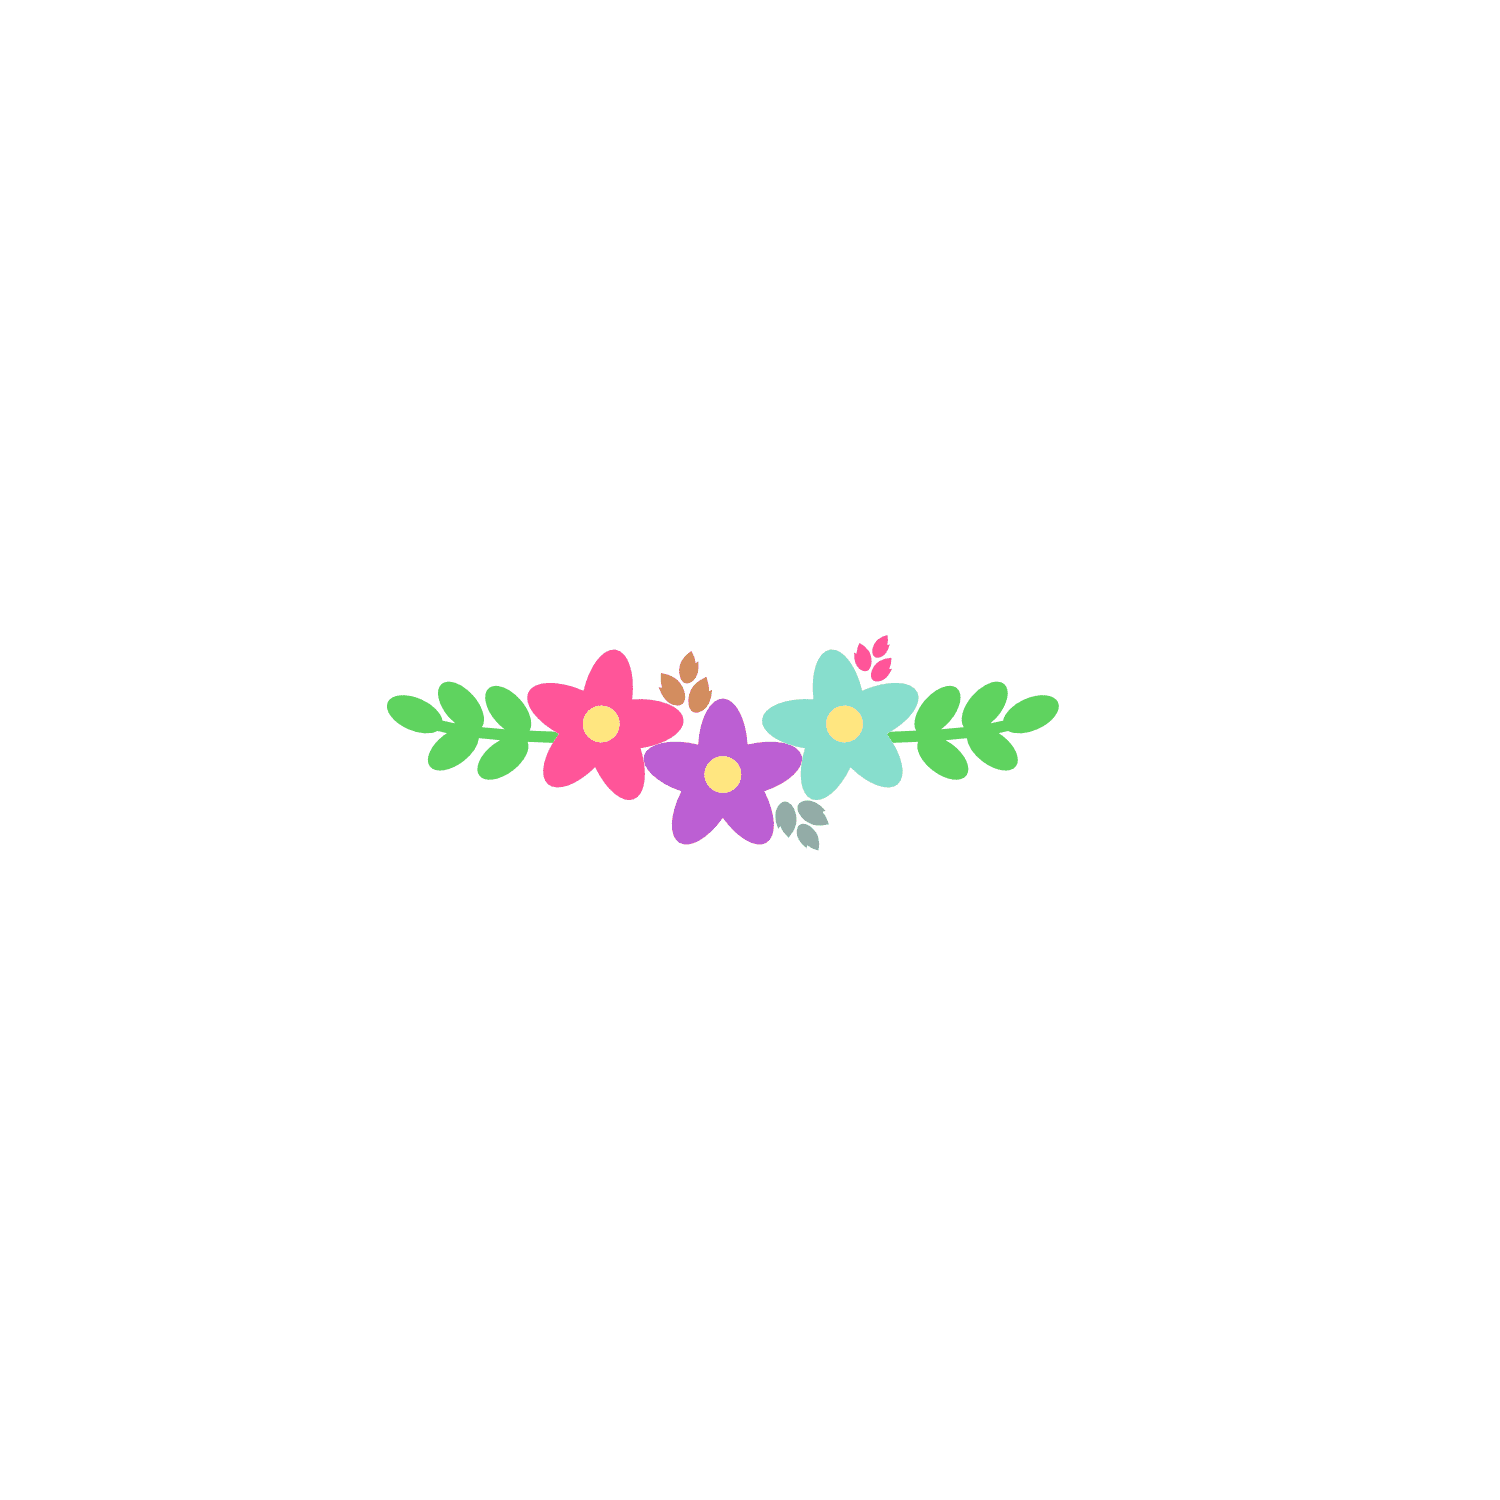 Rose Flower Bloom And Leaves - free svg file for members - SVG Heart